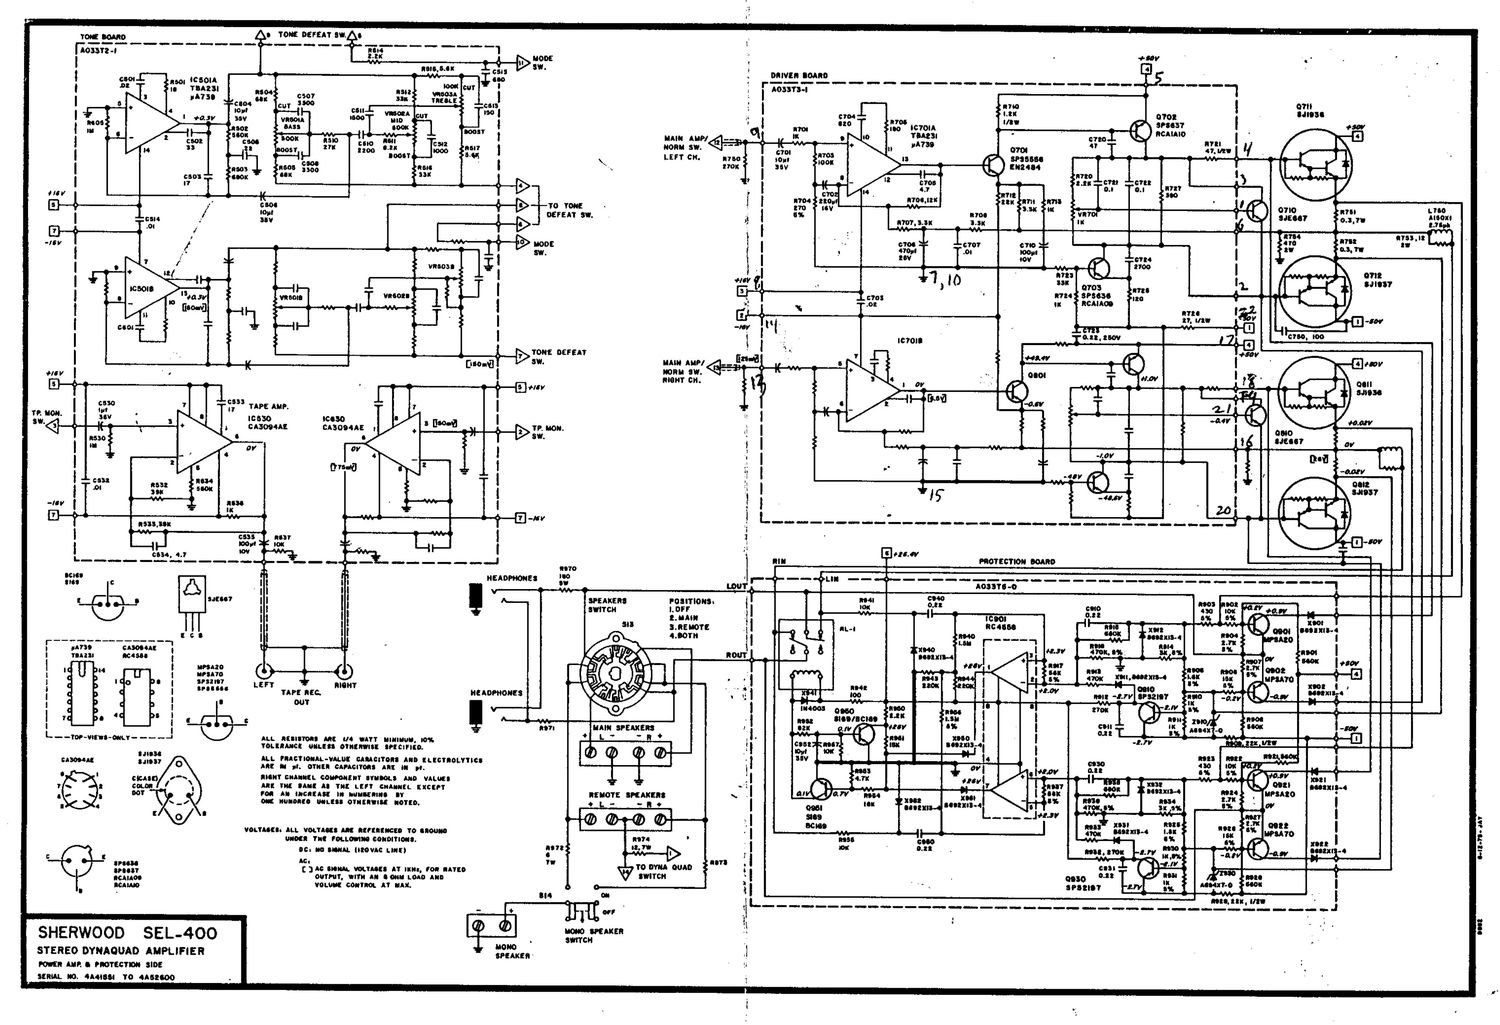 Sherwood SEL400 int schematic